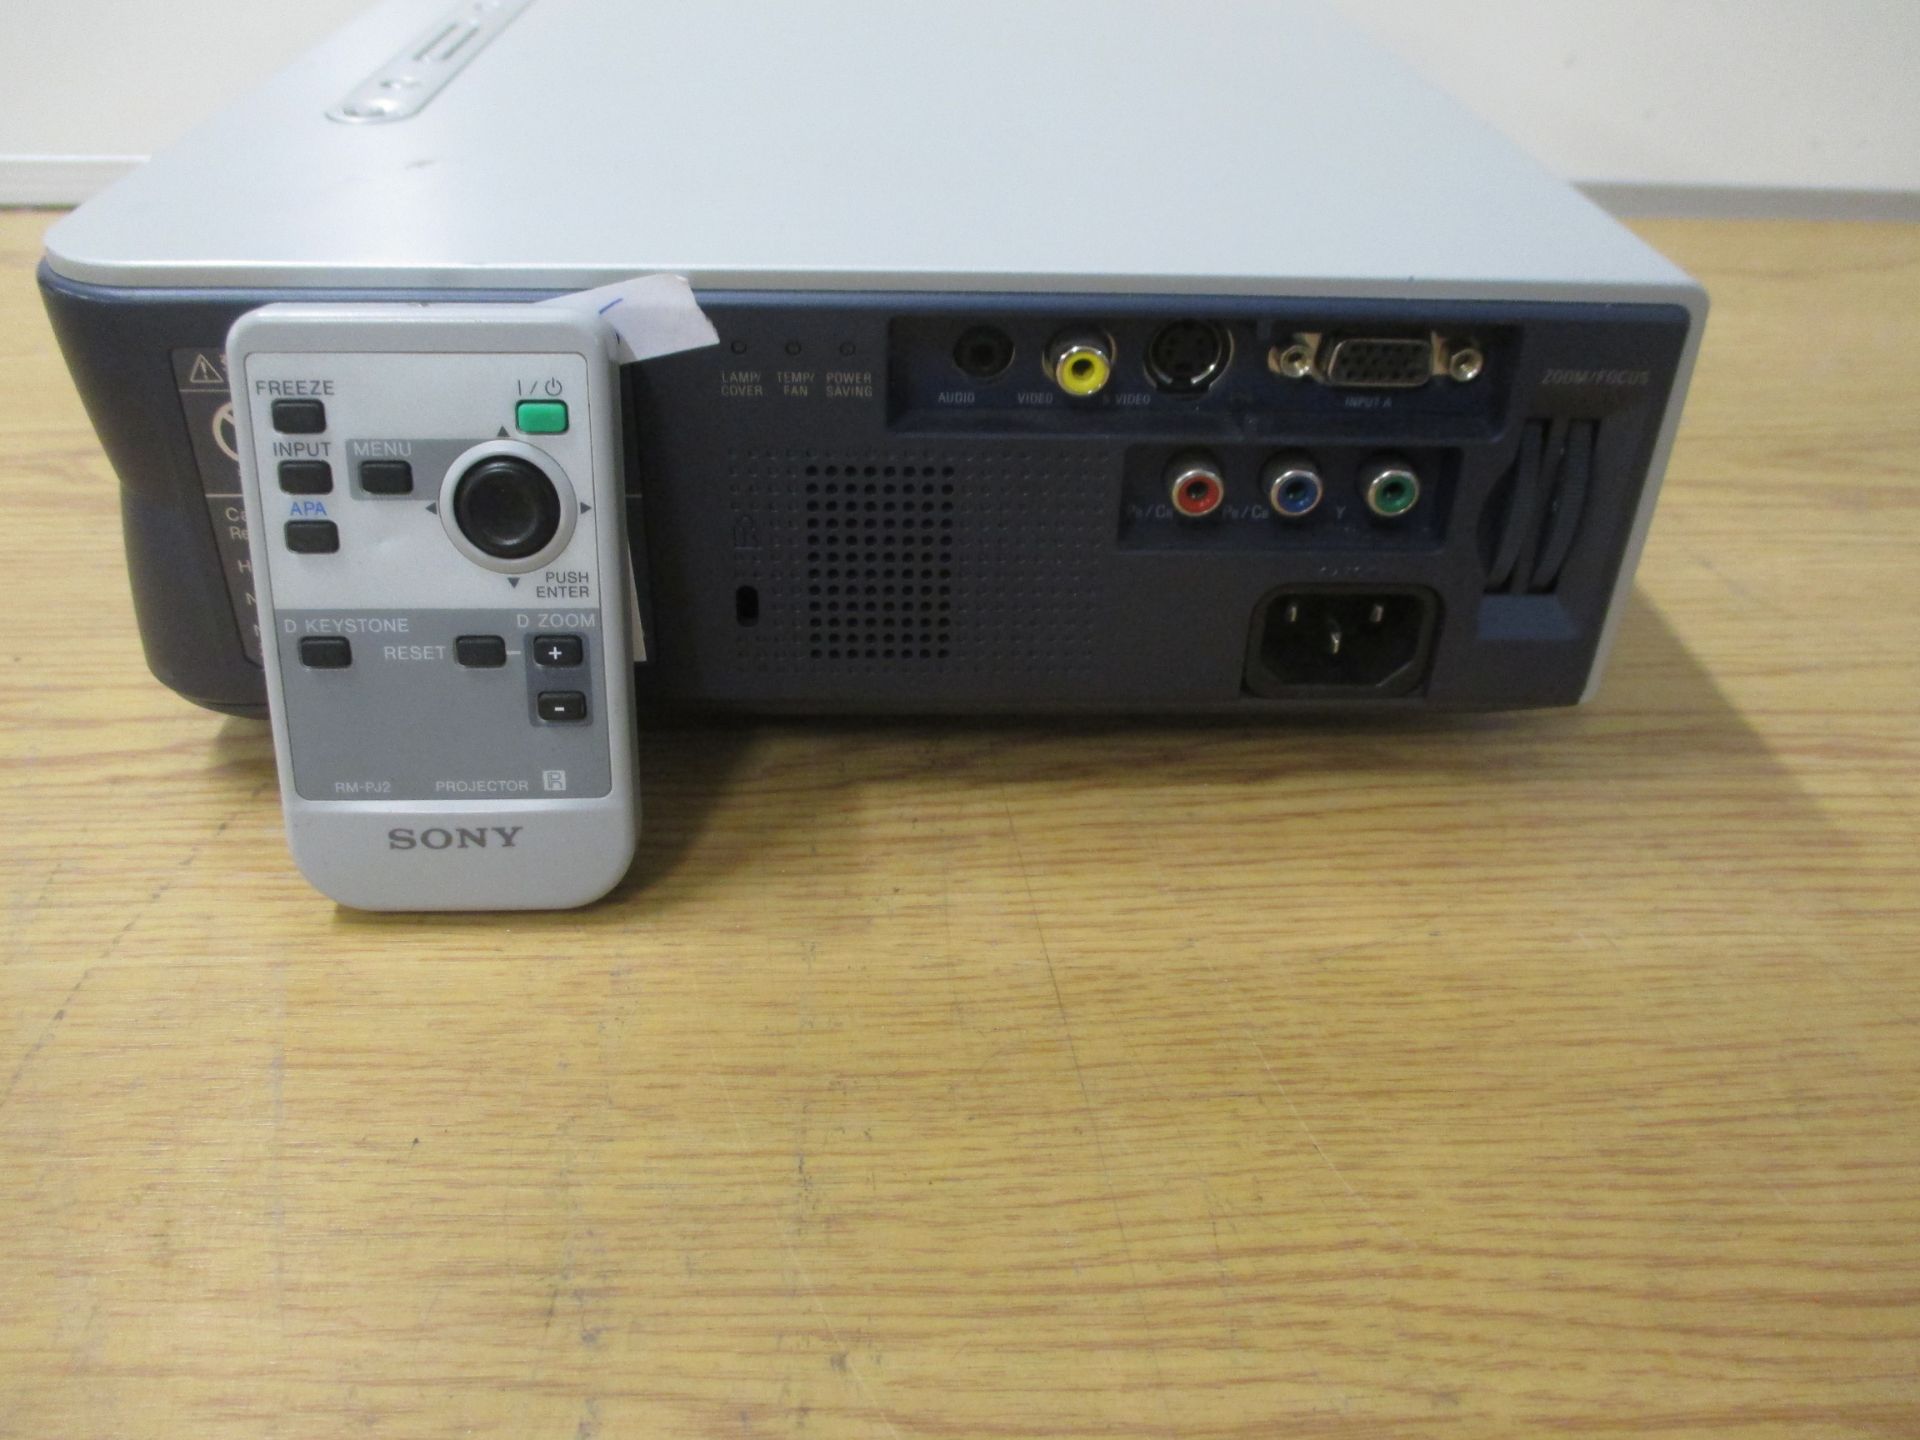 SONY 3LCD VPL-ES2 PROJECTOR WITH REMOTE CONTROL. SHOWING 1001 LAMP HOURS - Image 2 of 2